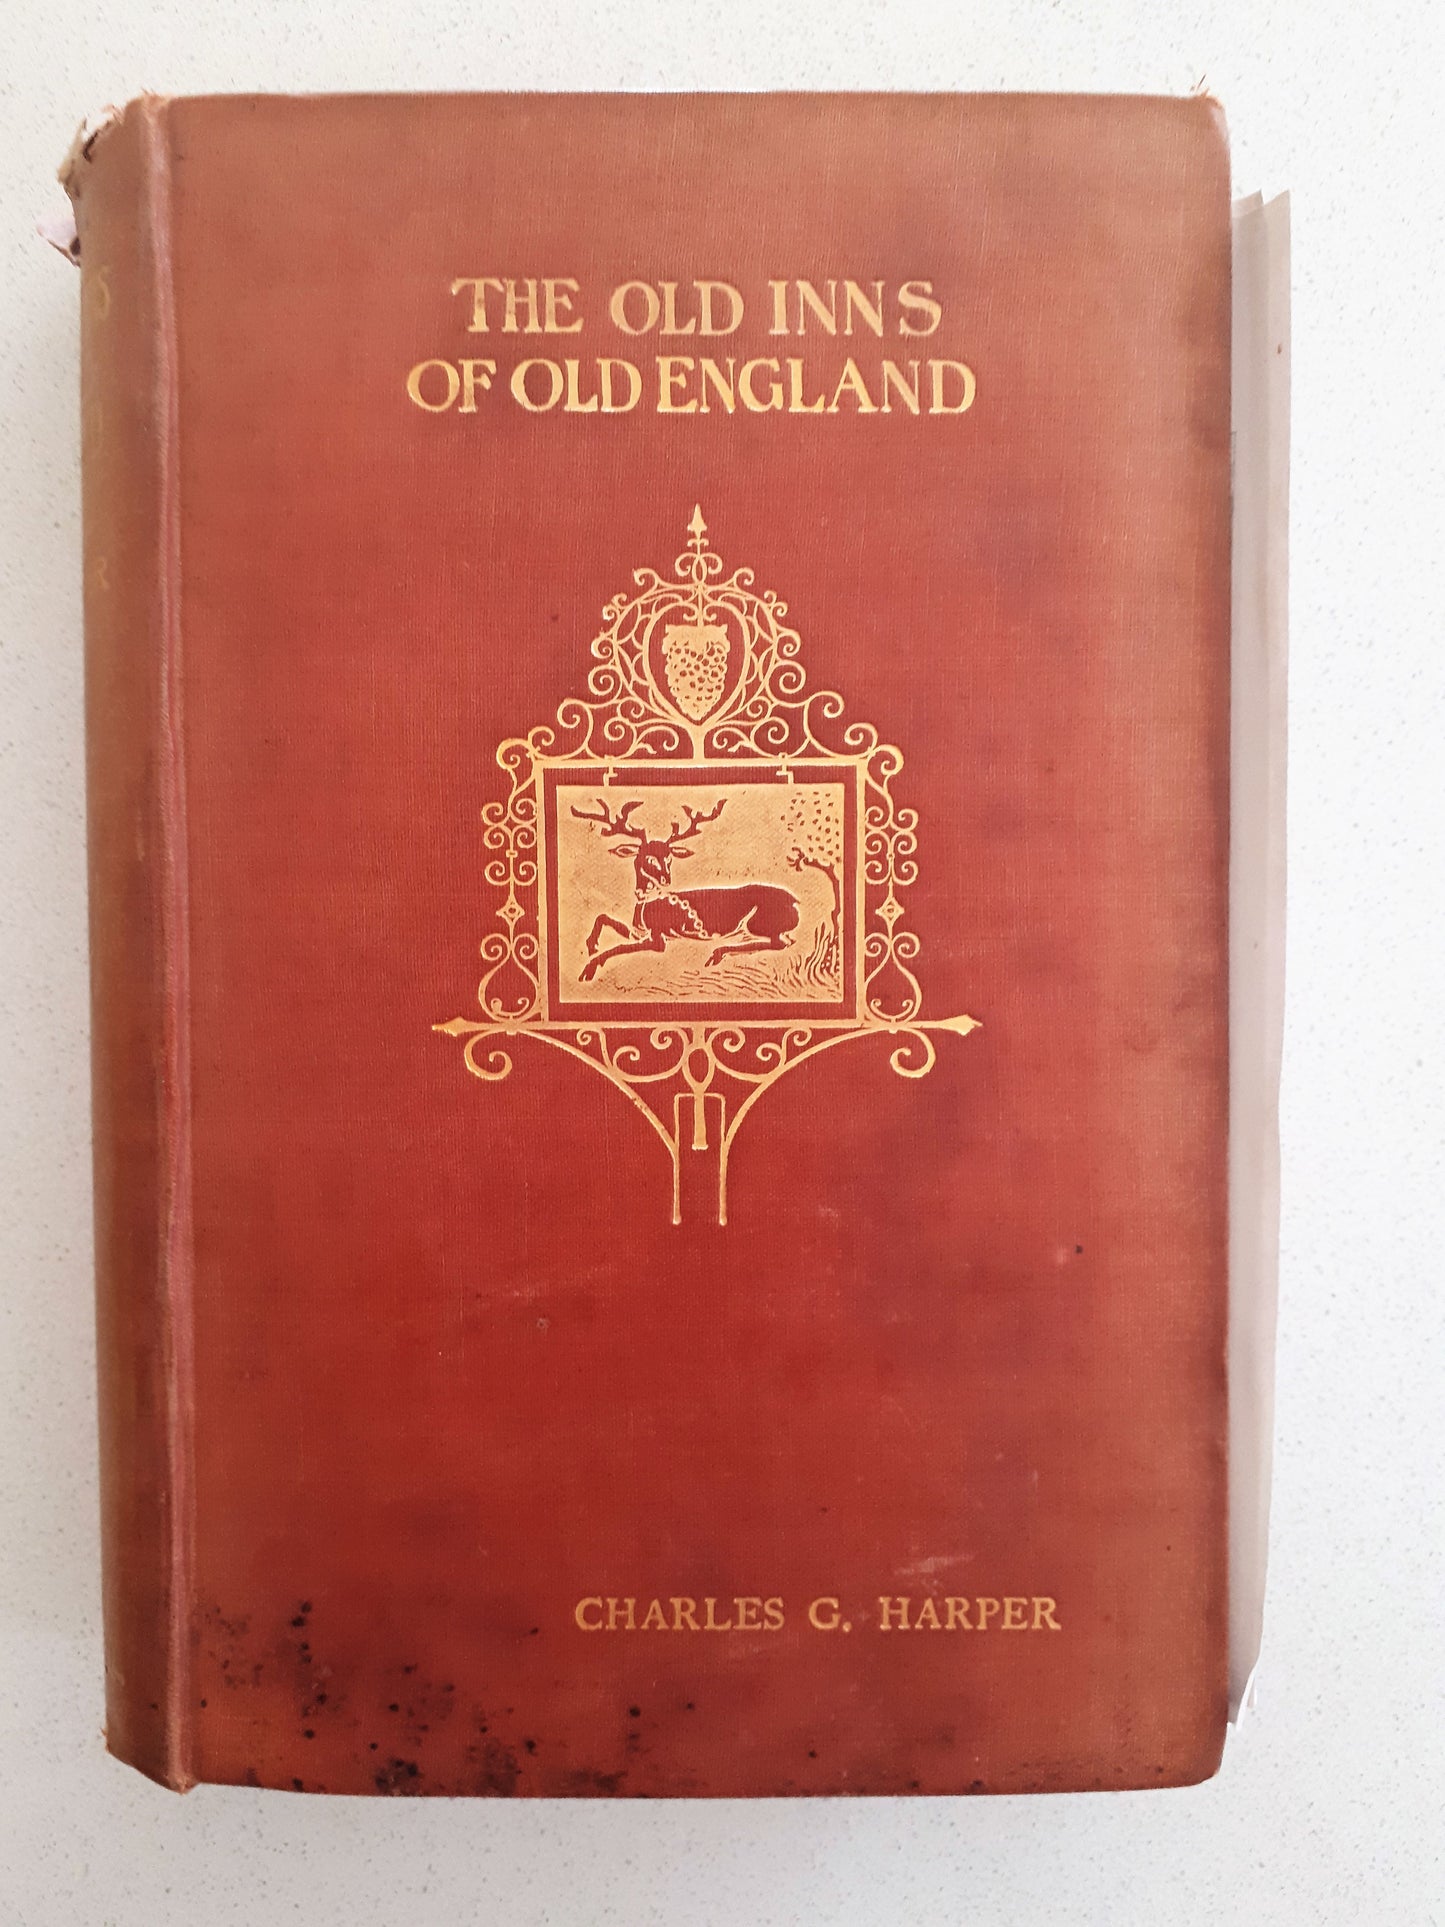 The Old Inns Of Old England - Vol I by Charles G, Harper